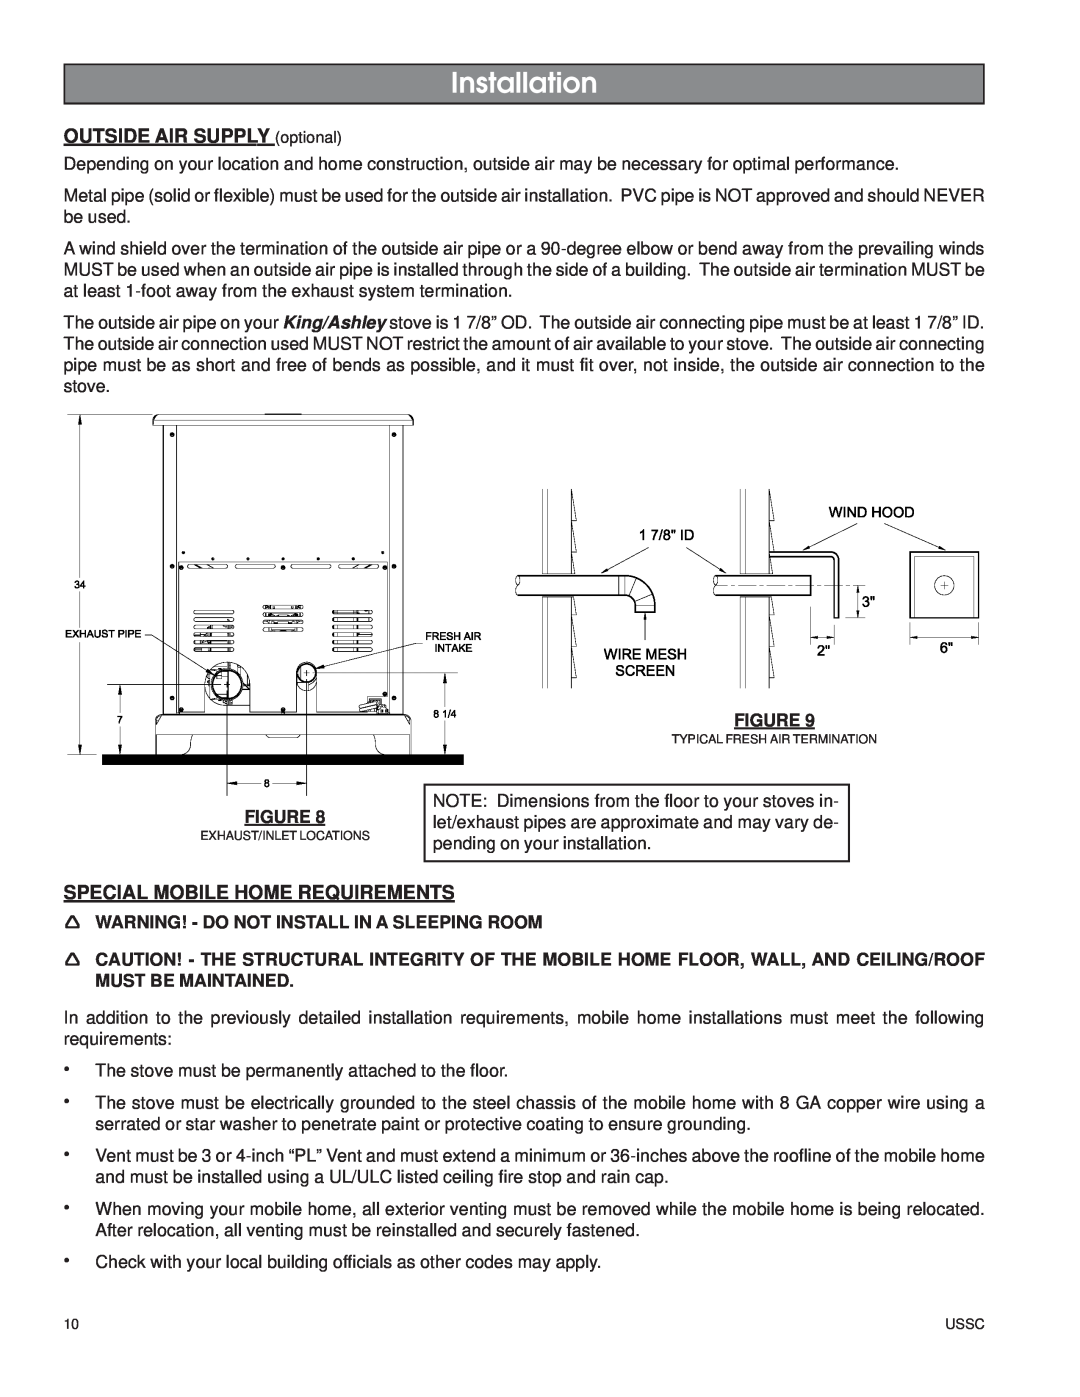 United States Stove 5500XL owner manual Installation, OUTSIDE AIR SUPPLYoptional, Special Mobile Home Requirements 